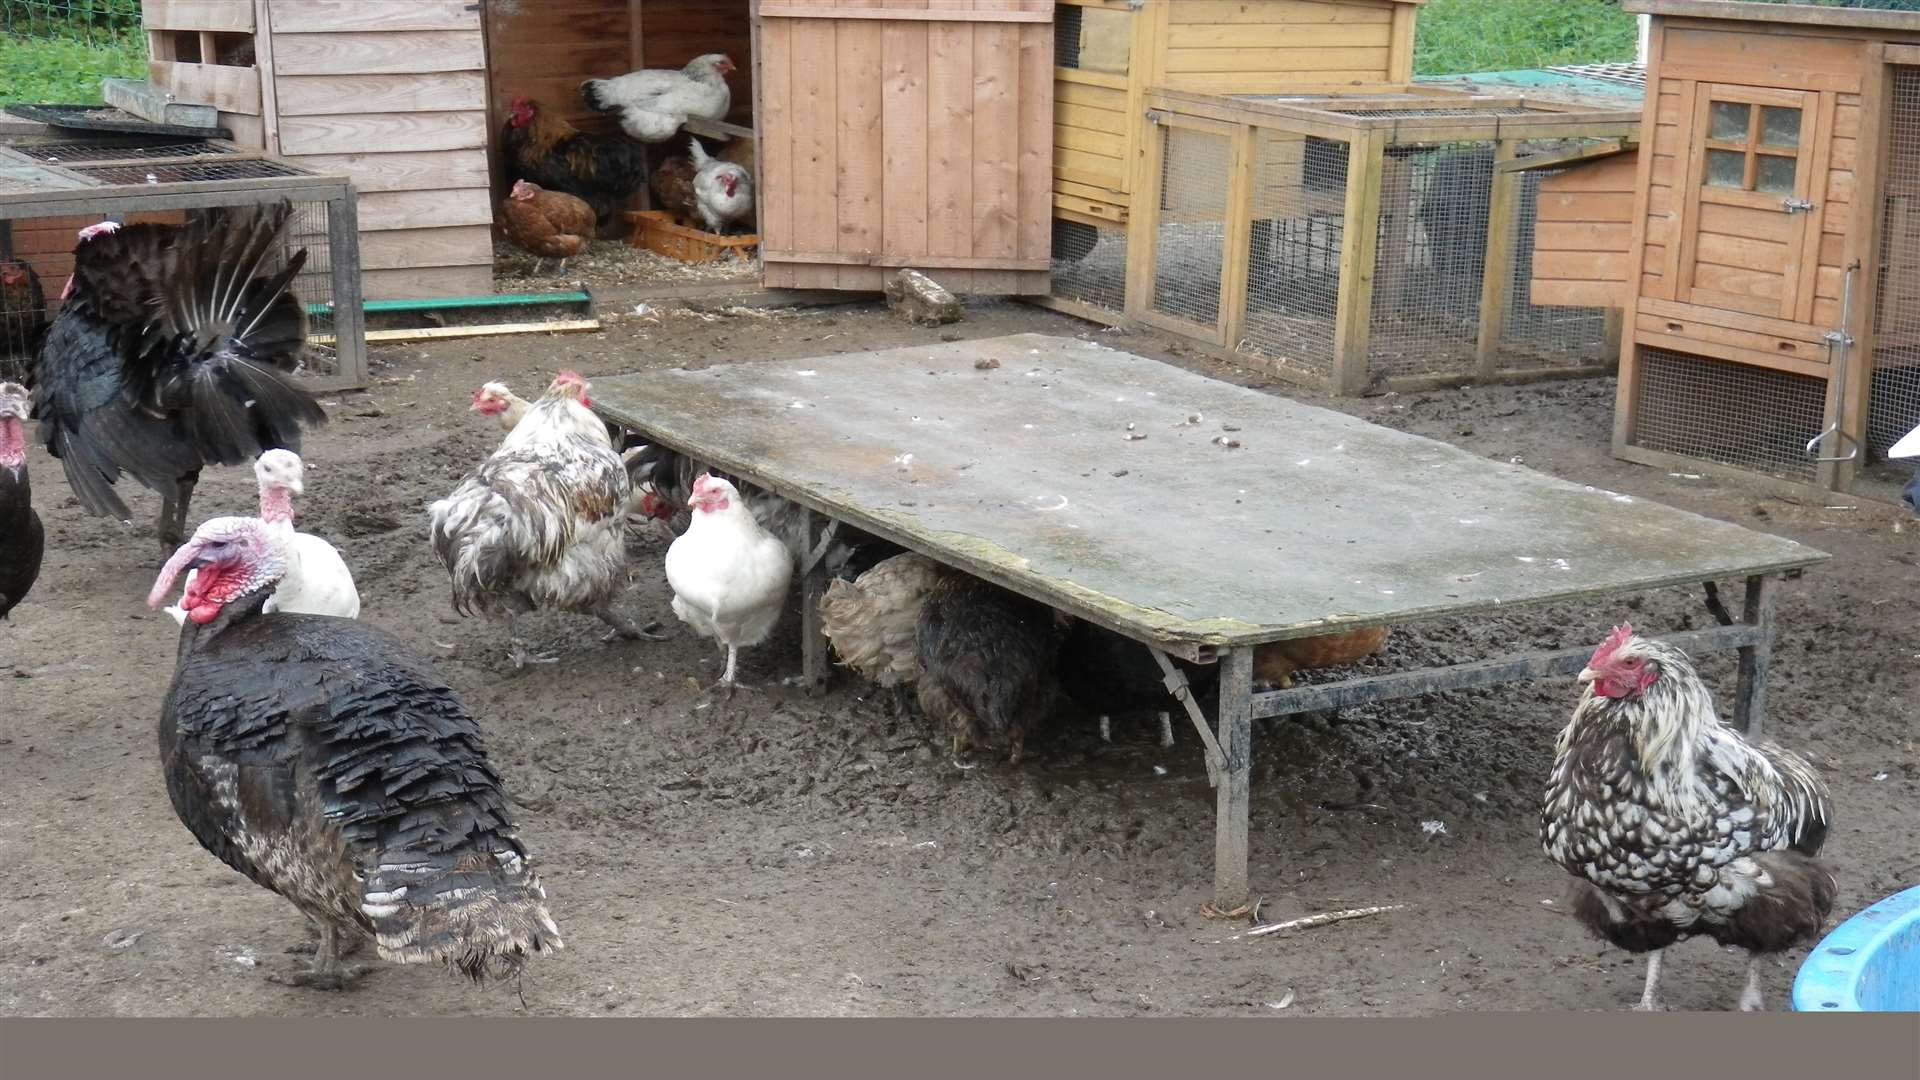 Some of the poultry which were found to have been unnecessarily suffering after an RSPCA investigation.